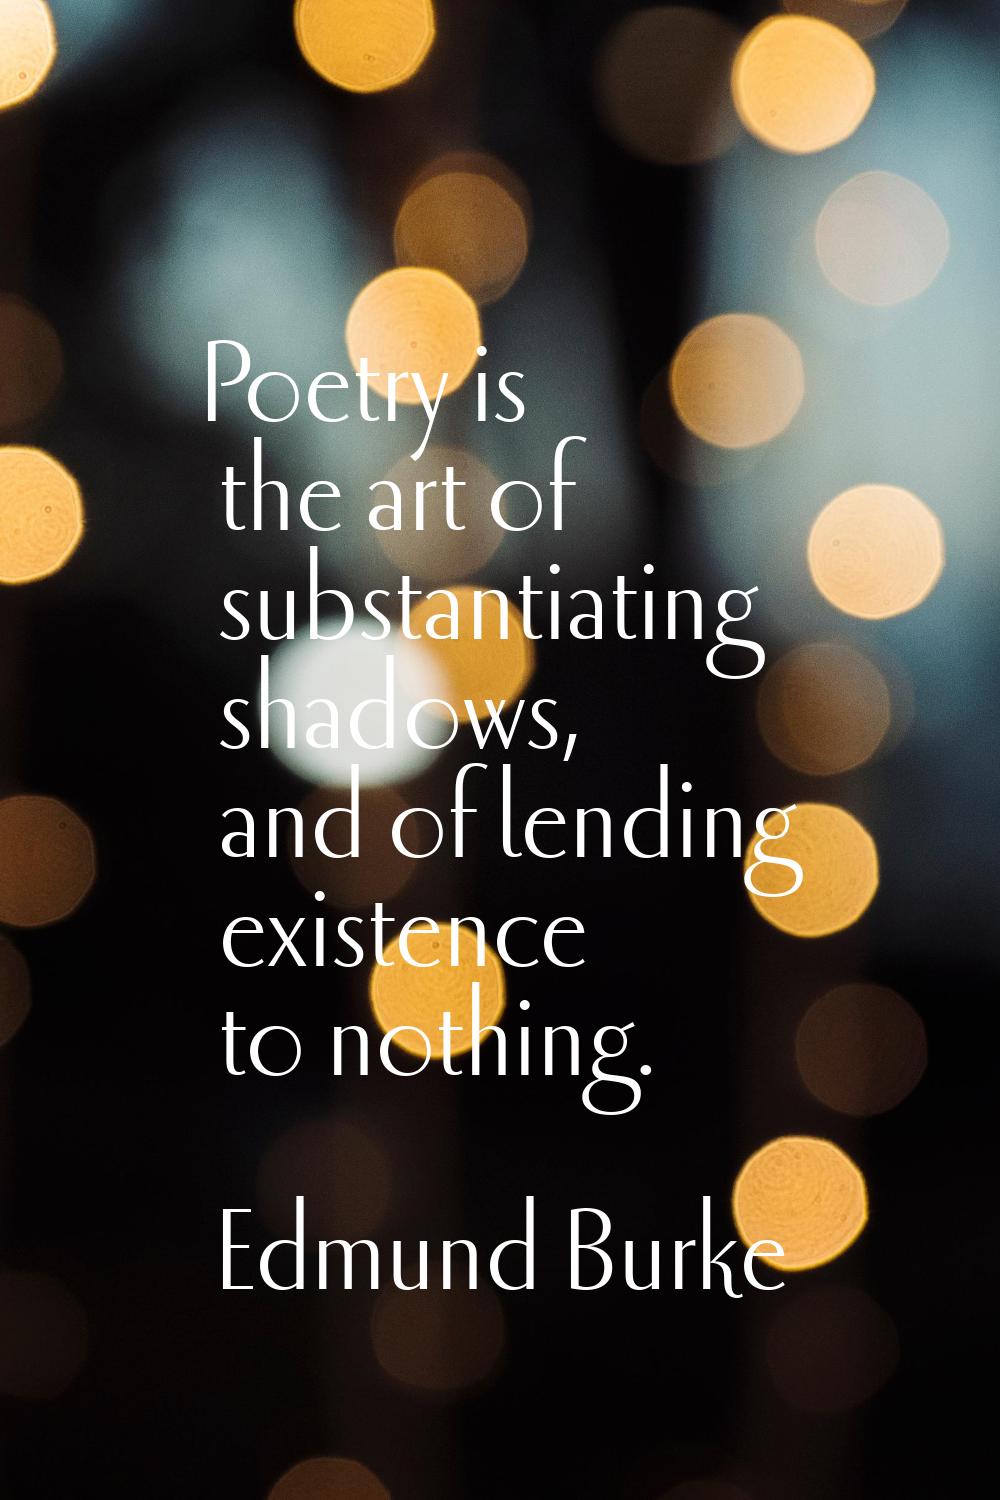 Poetry is the art of substantiating shadows, and of lending existence to nothing.